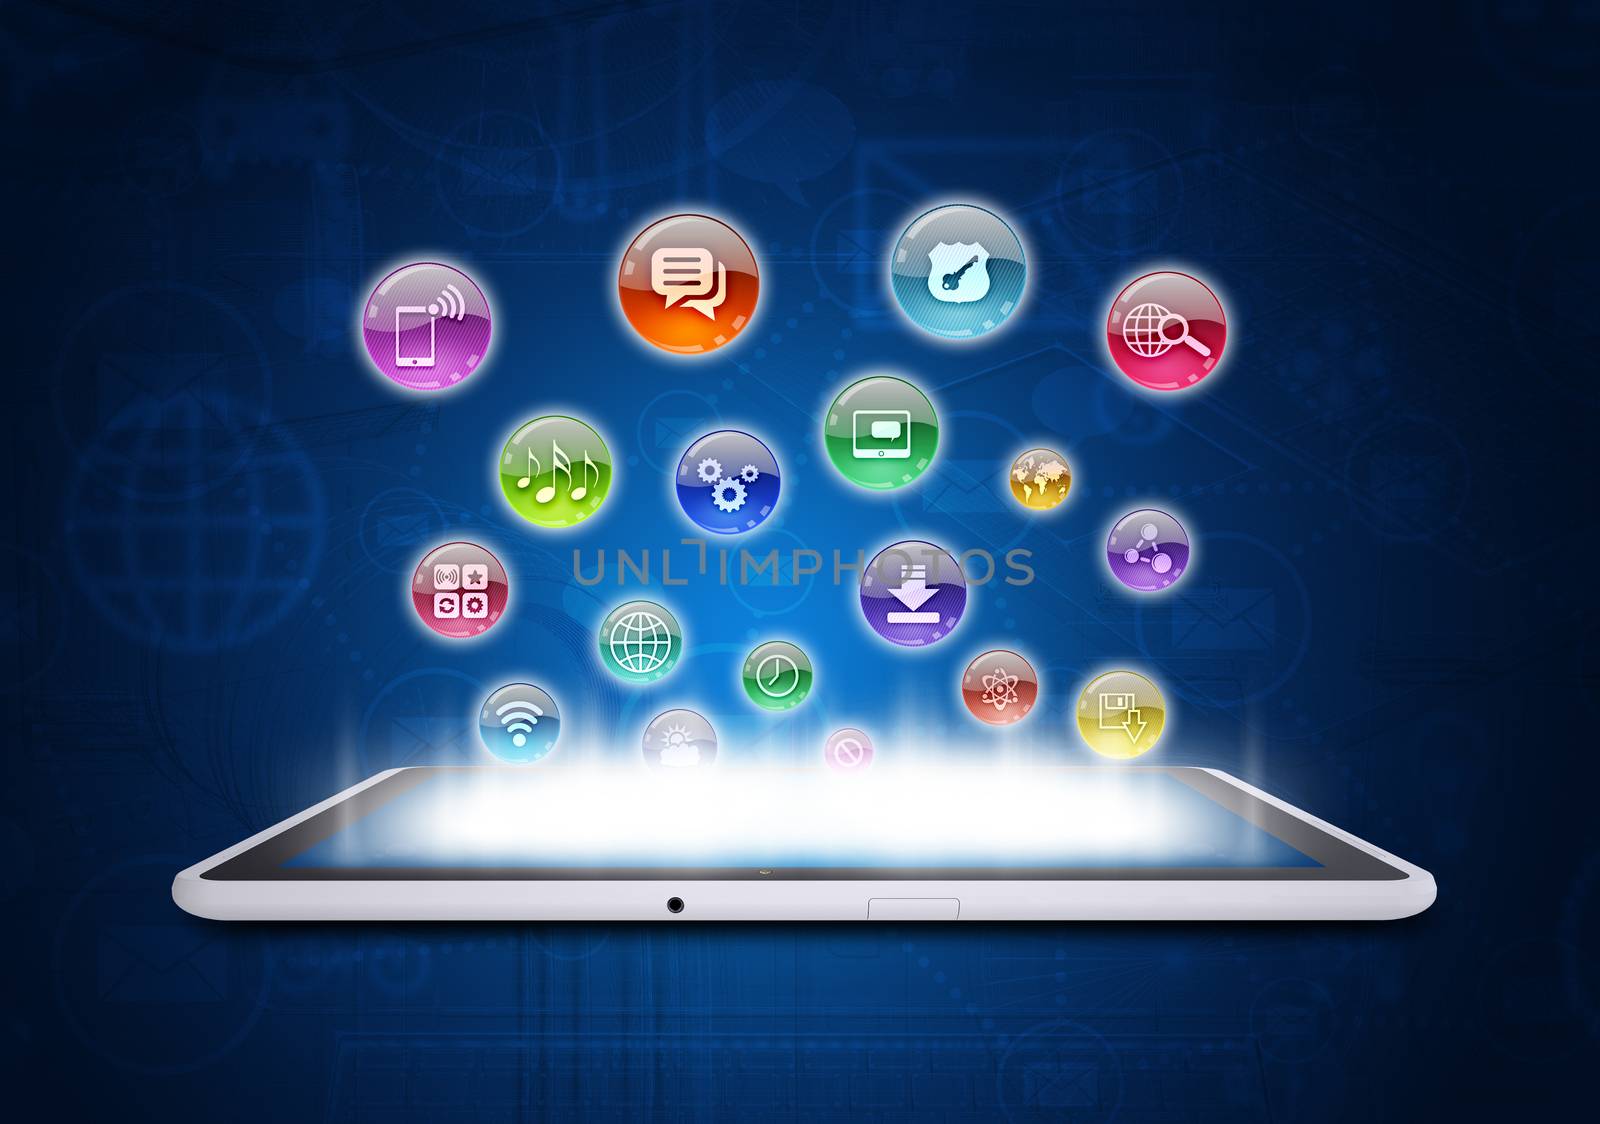 Tablet PC and application icons by cherezoff